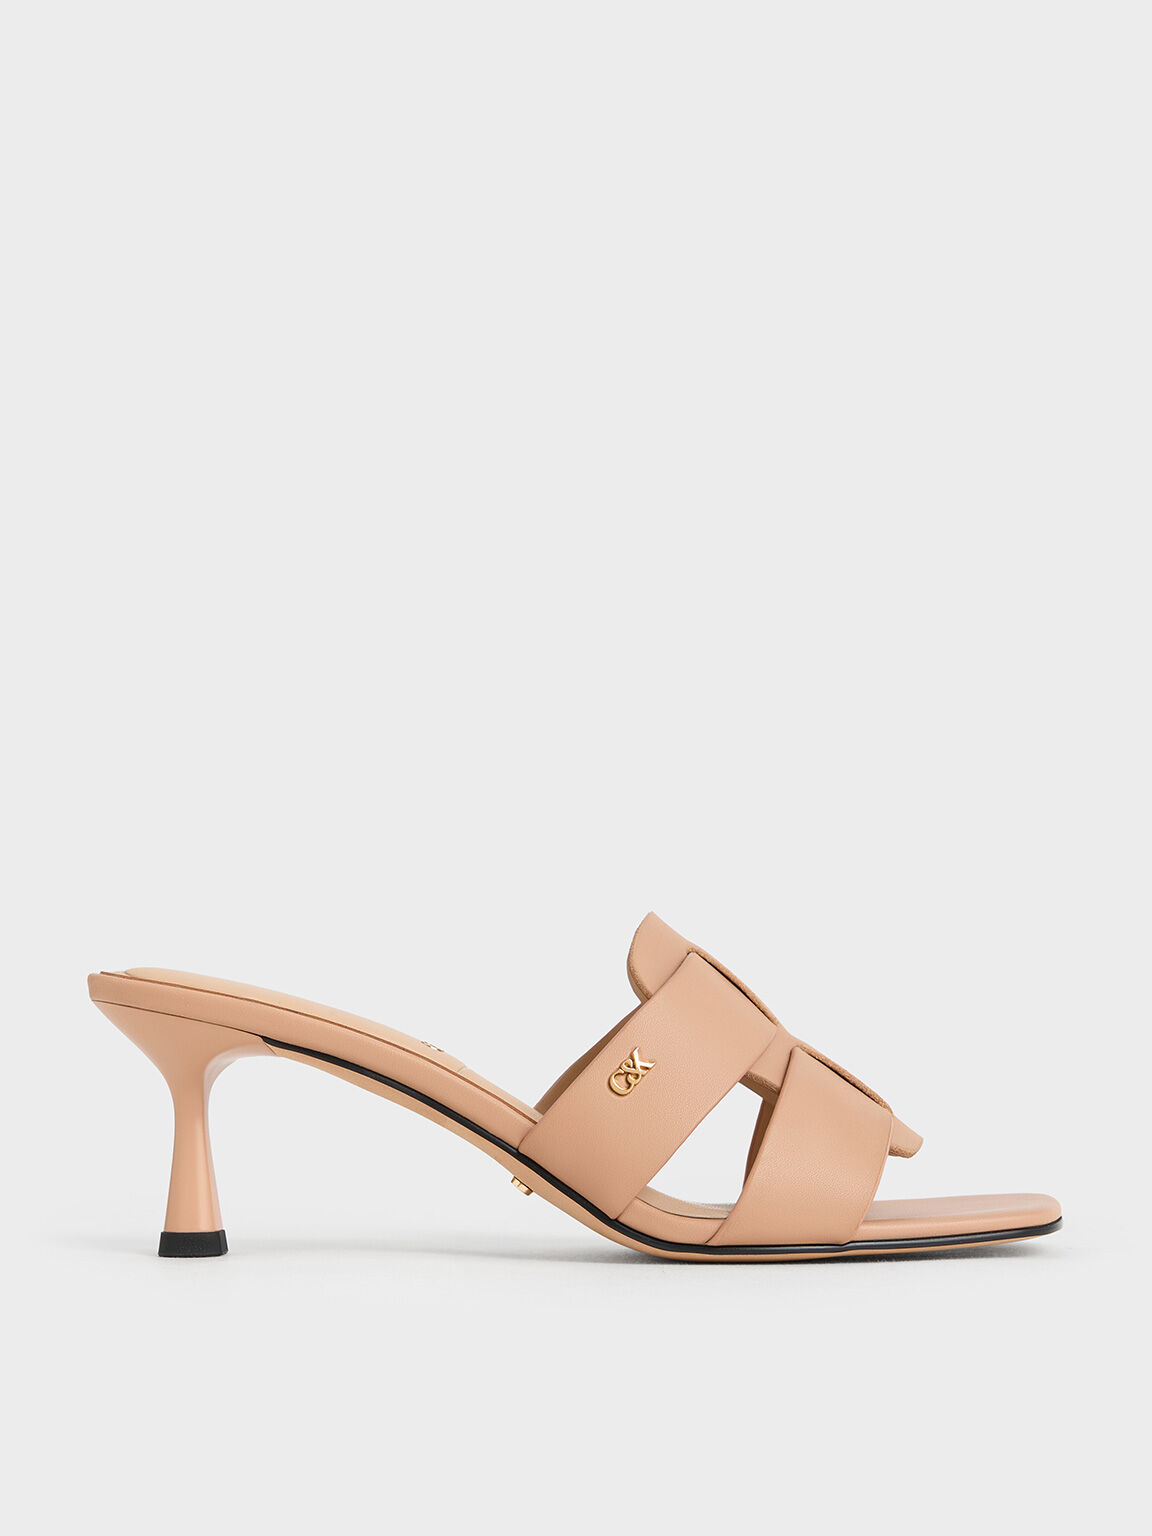 Trichelle Interwoven Leather Spool Heel Mules, Nude, hi-res